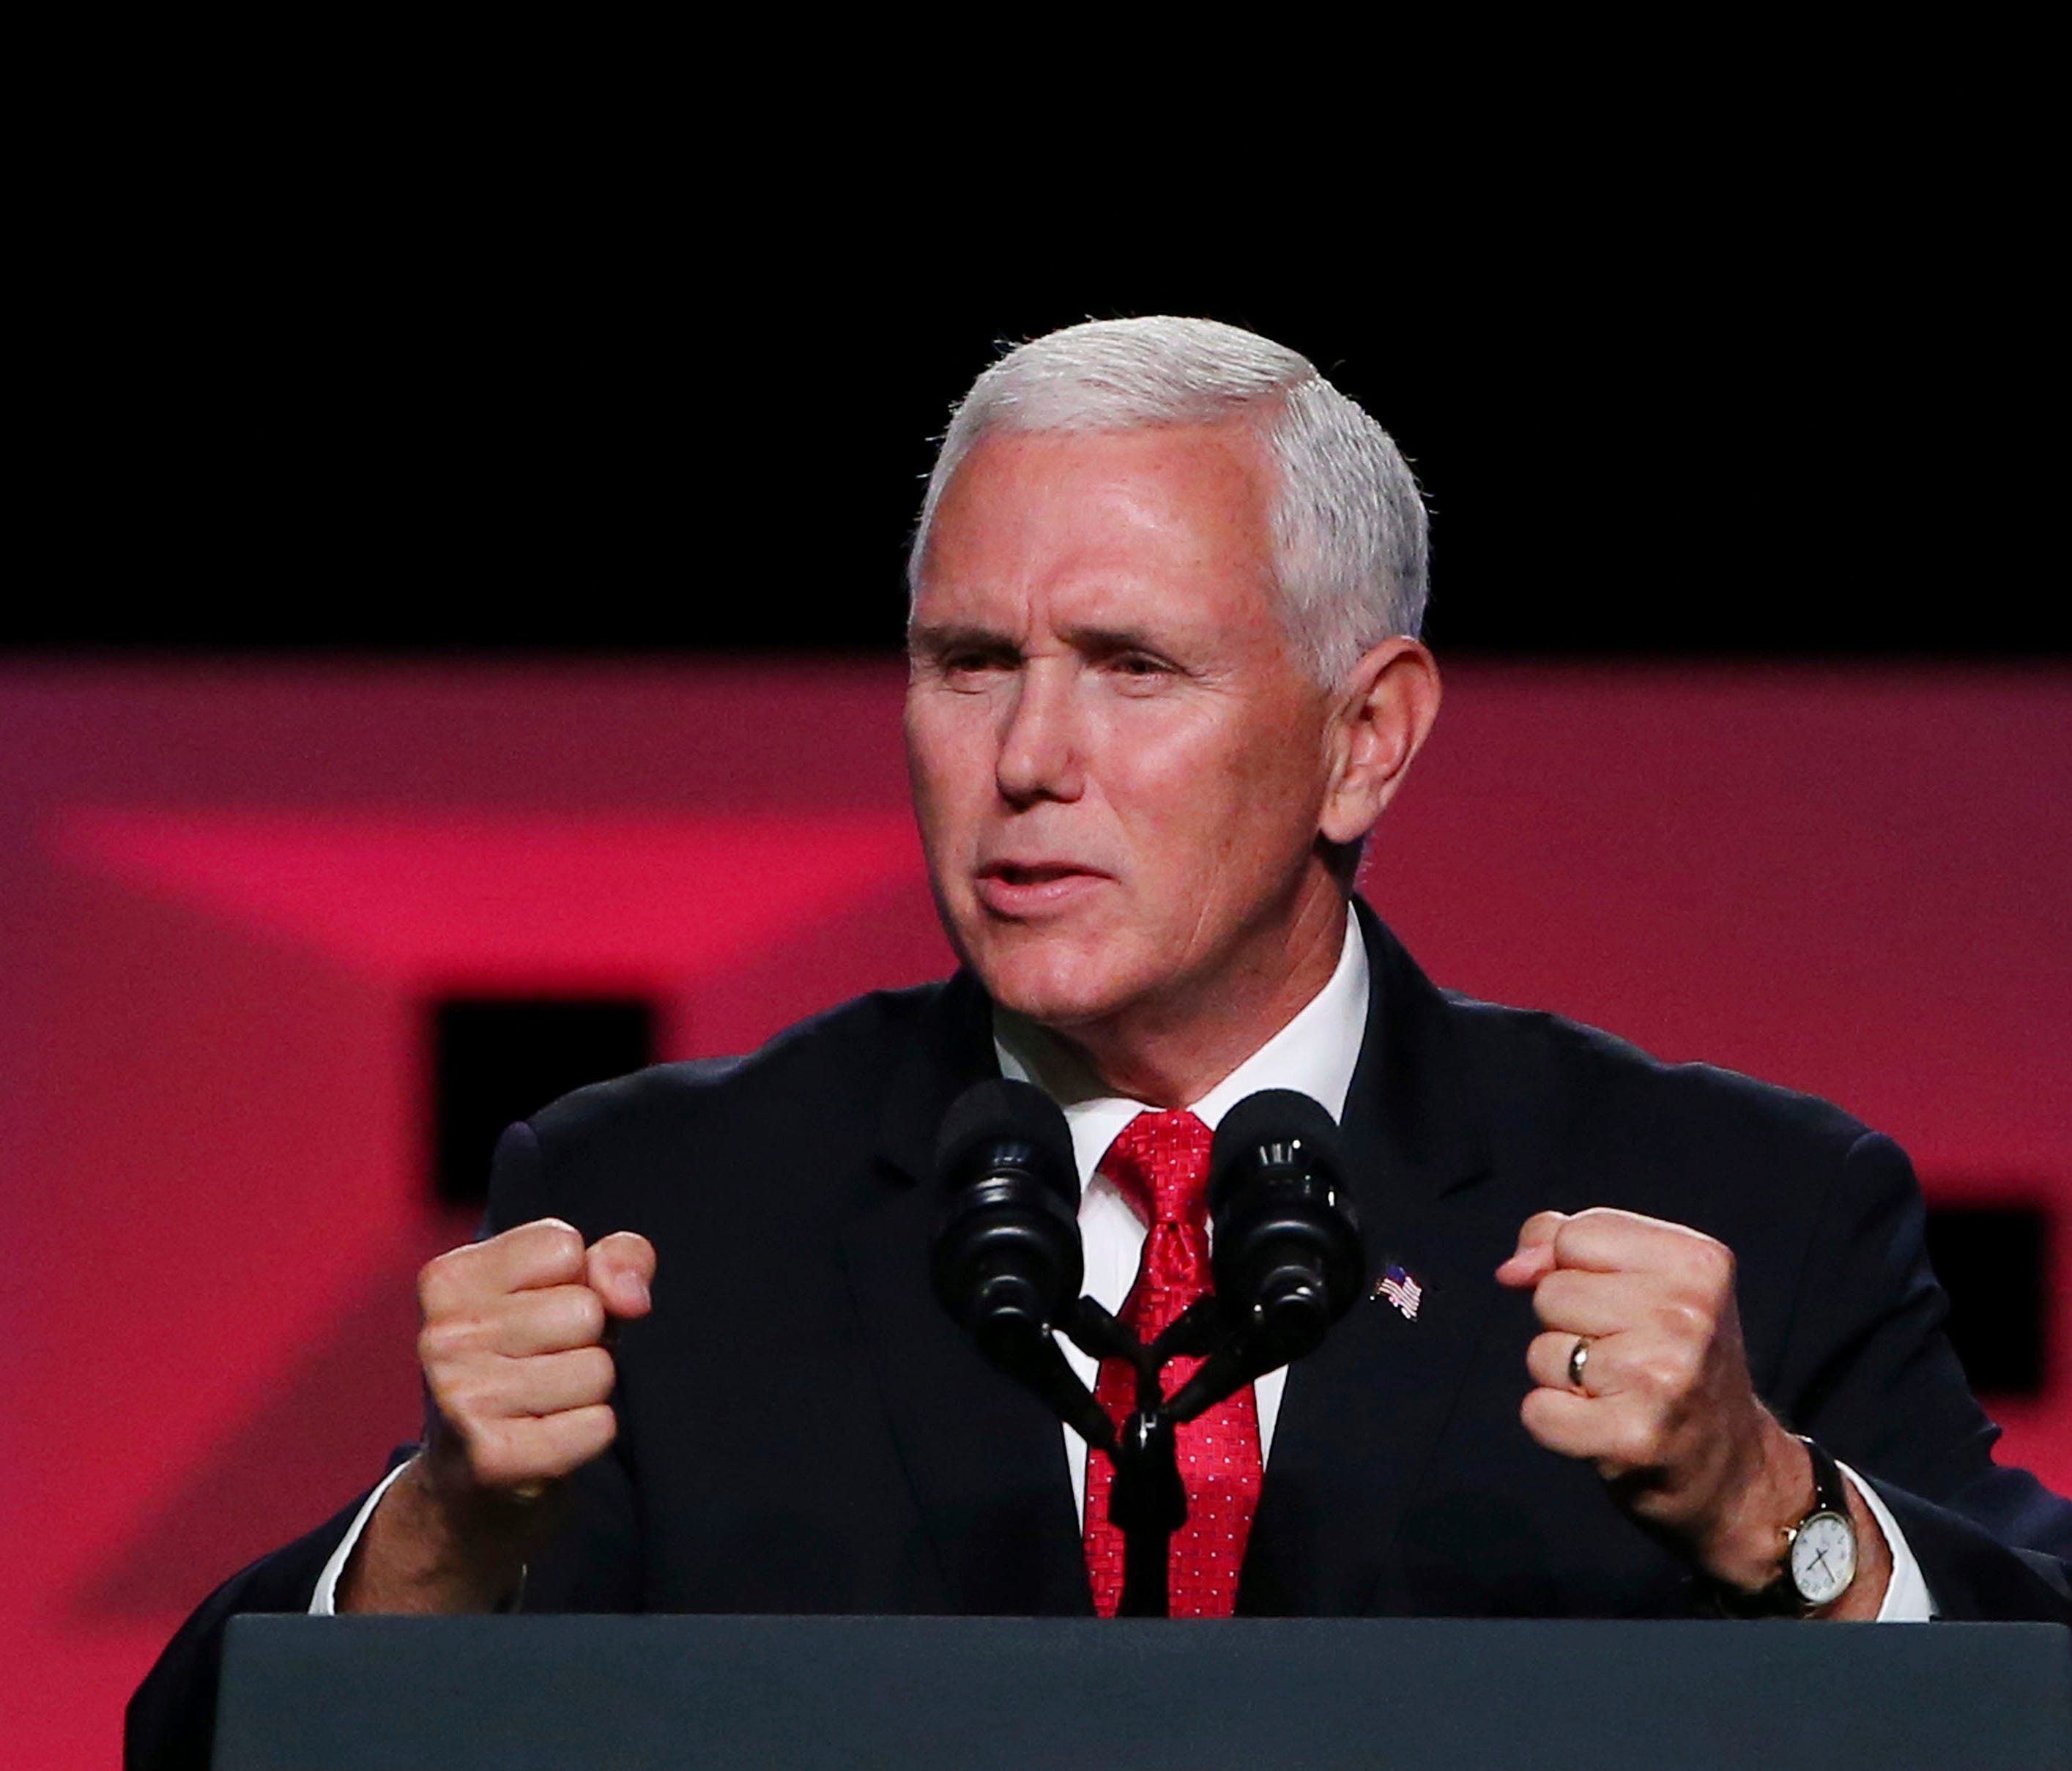 Vice president Mike Pence speaks at the annual meeting of The Southern Baptist Convention at the Kay Bailey Hutchison Convention Center in Dallas Wednesday, June 13, 2018.